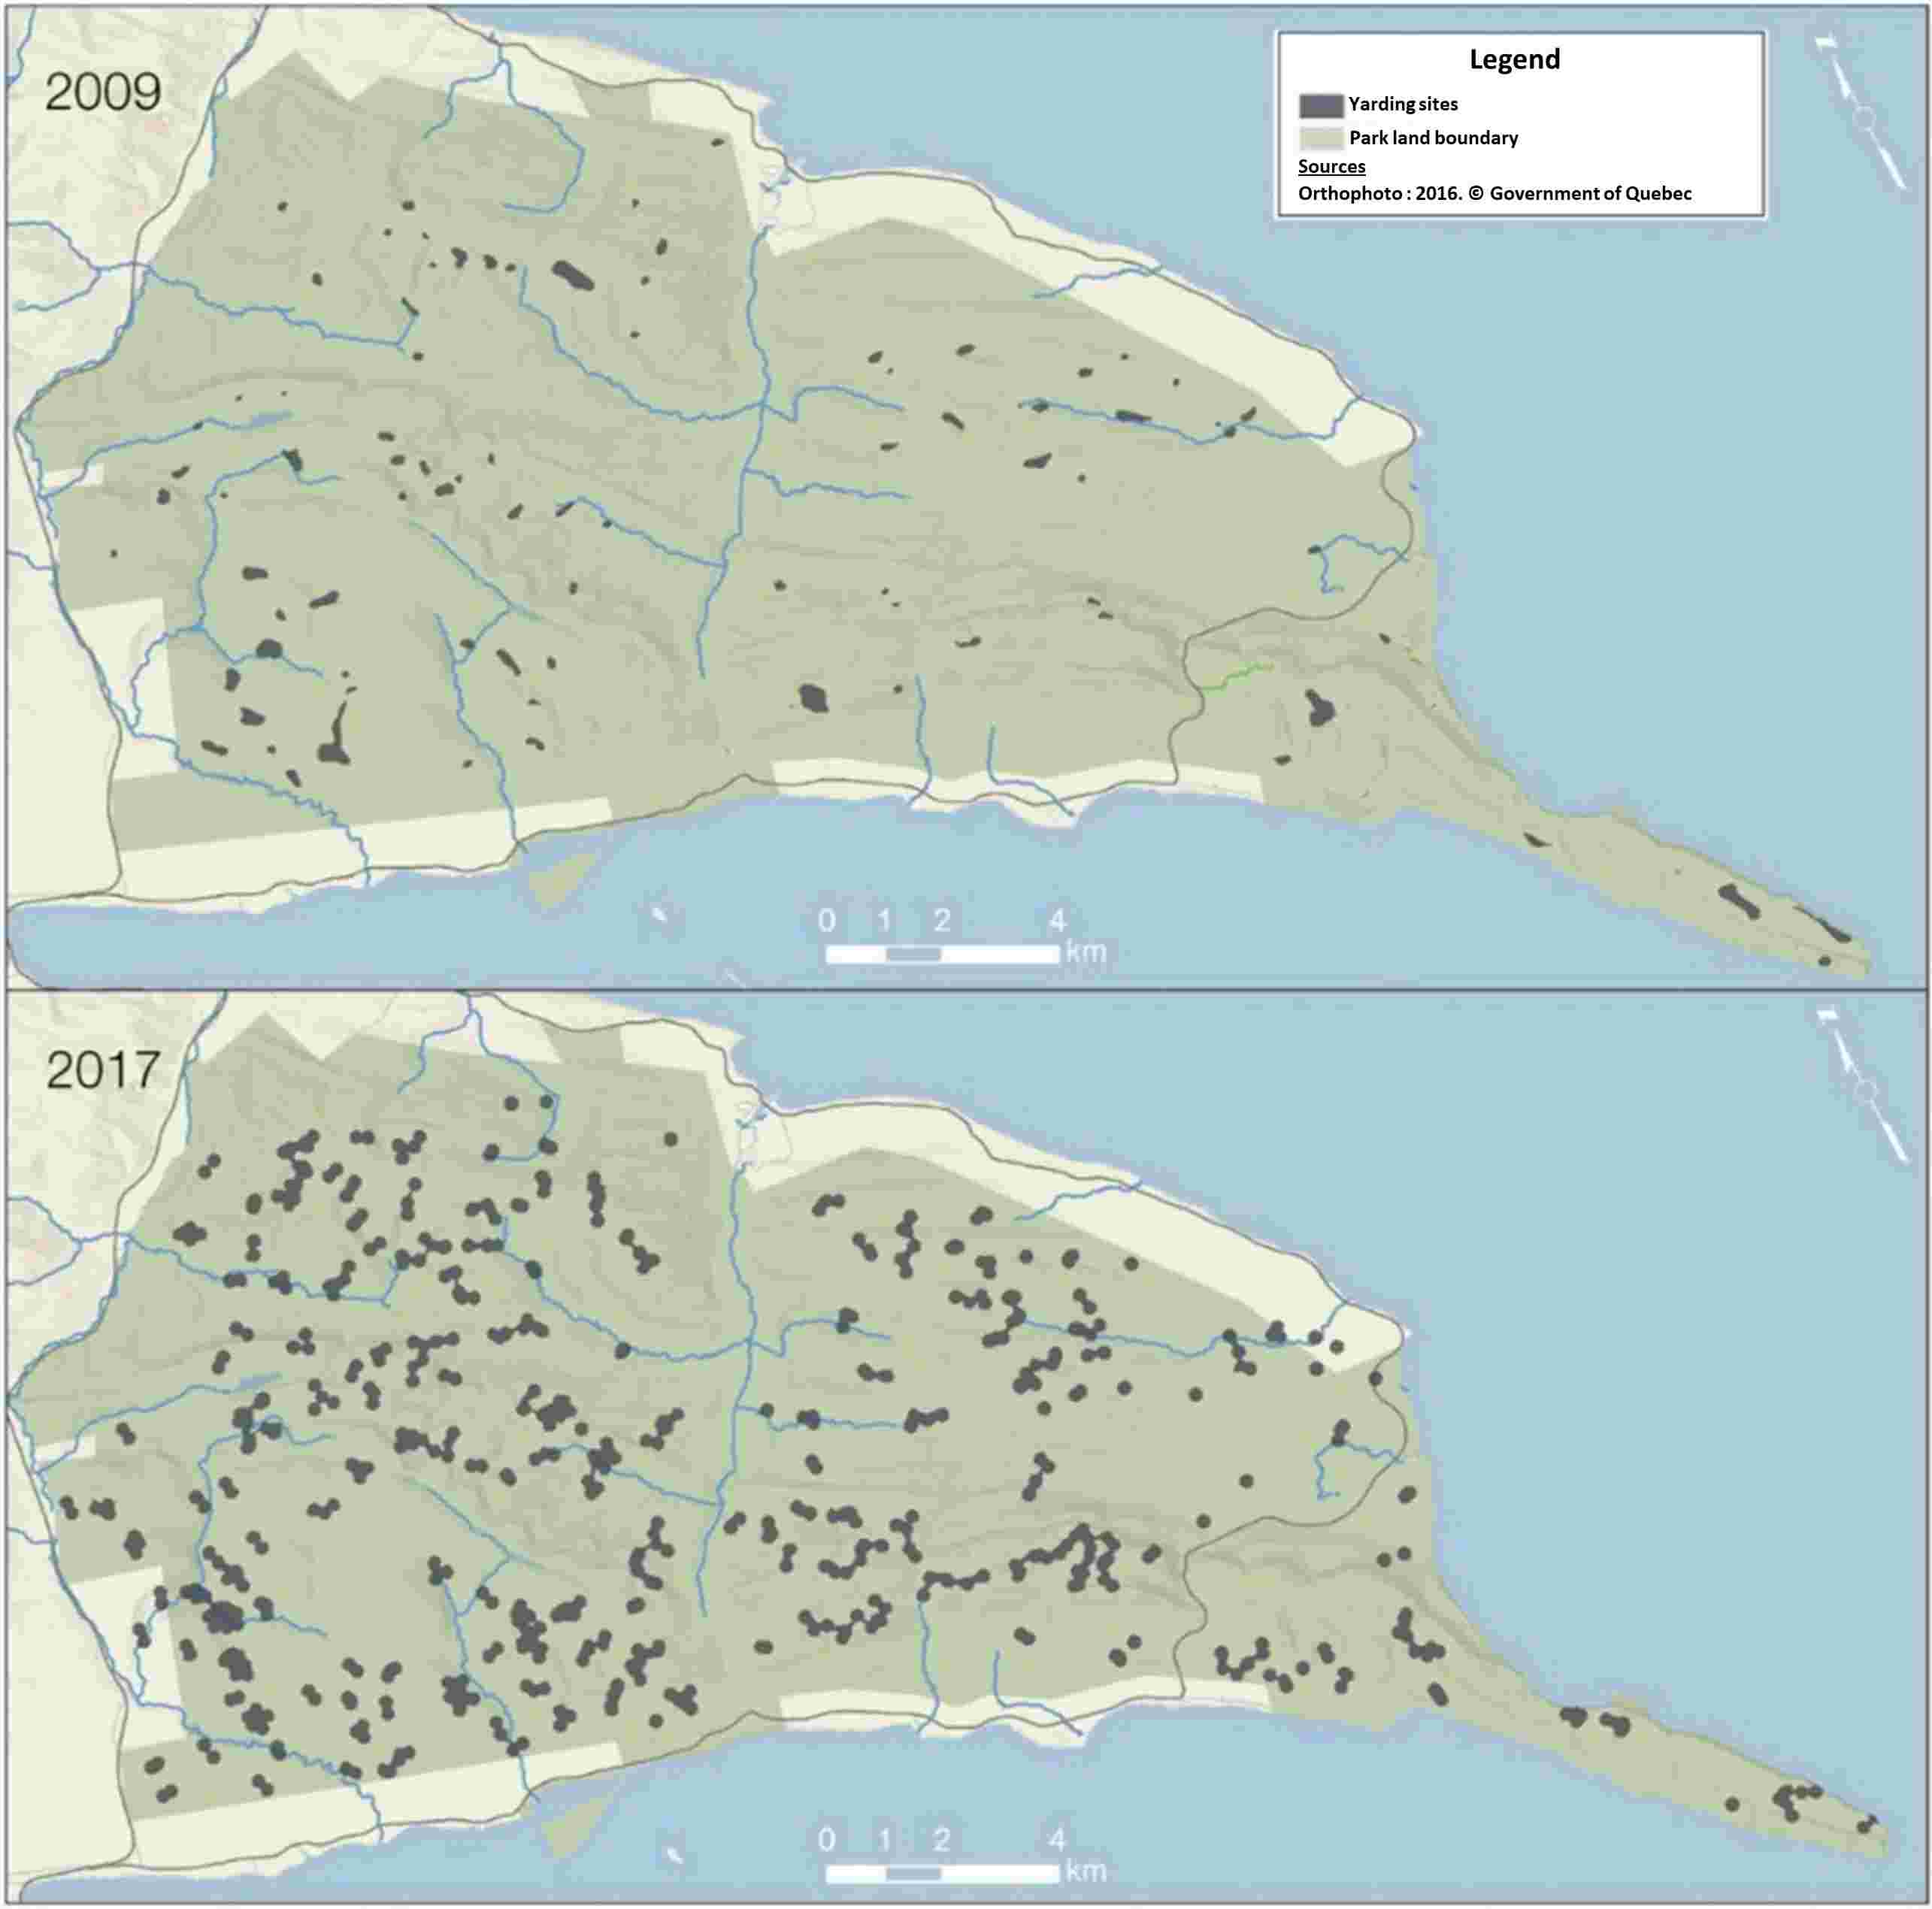 Figure 4. Two geographic maps showing Forillon National Park and a comparison of the distribution of moose yards